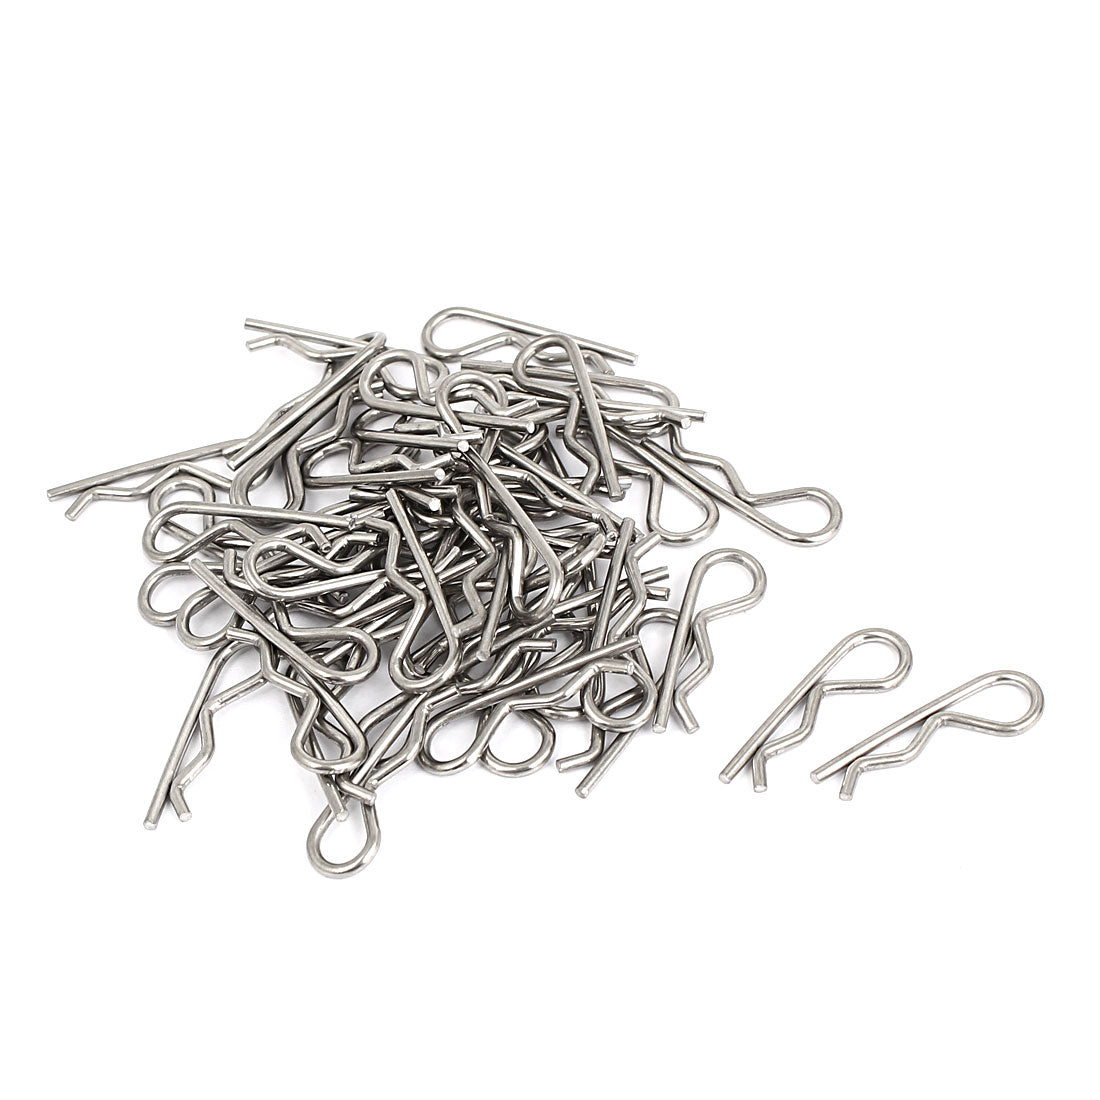 uxcell Uxcell 50 Pcs Spring Stainless Steel Cotter Clip Pin Hardware 1.6mm x 28mm